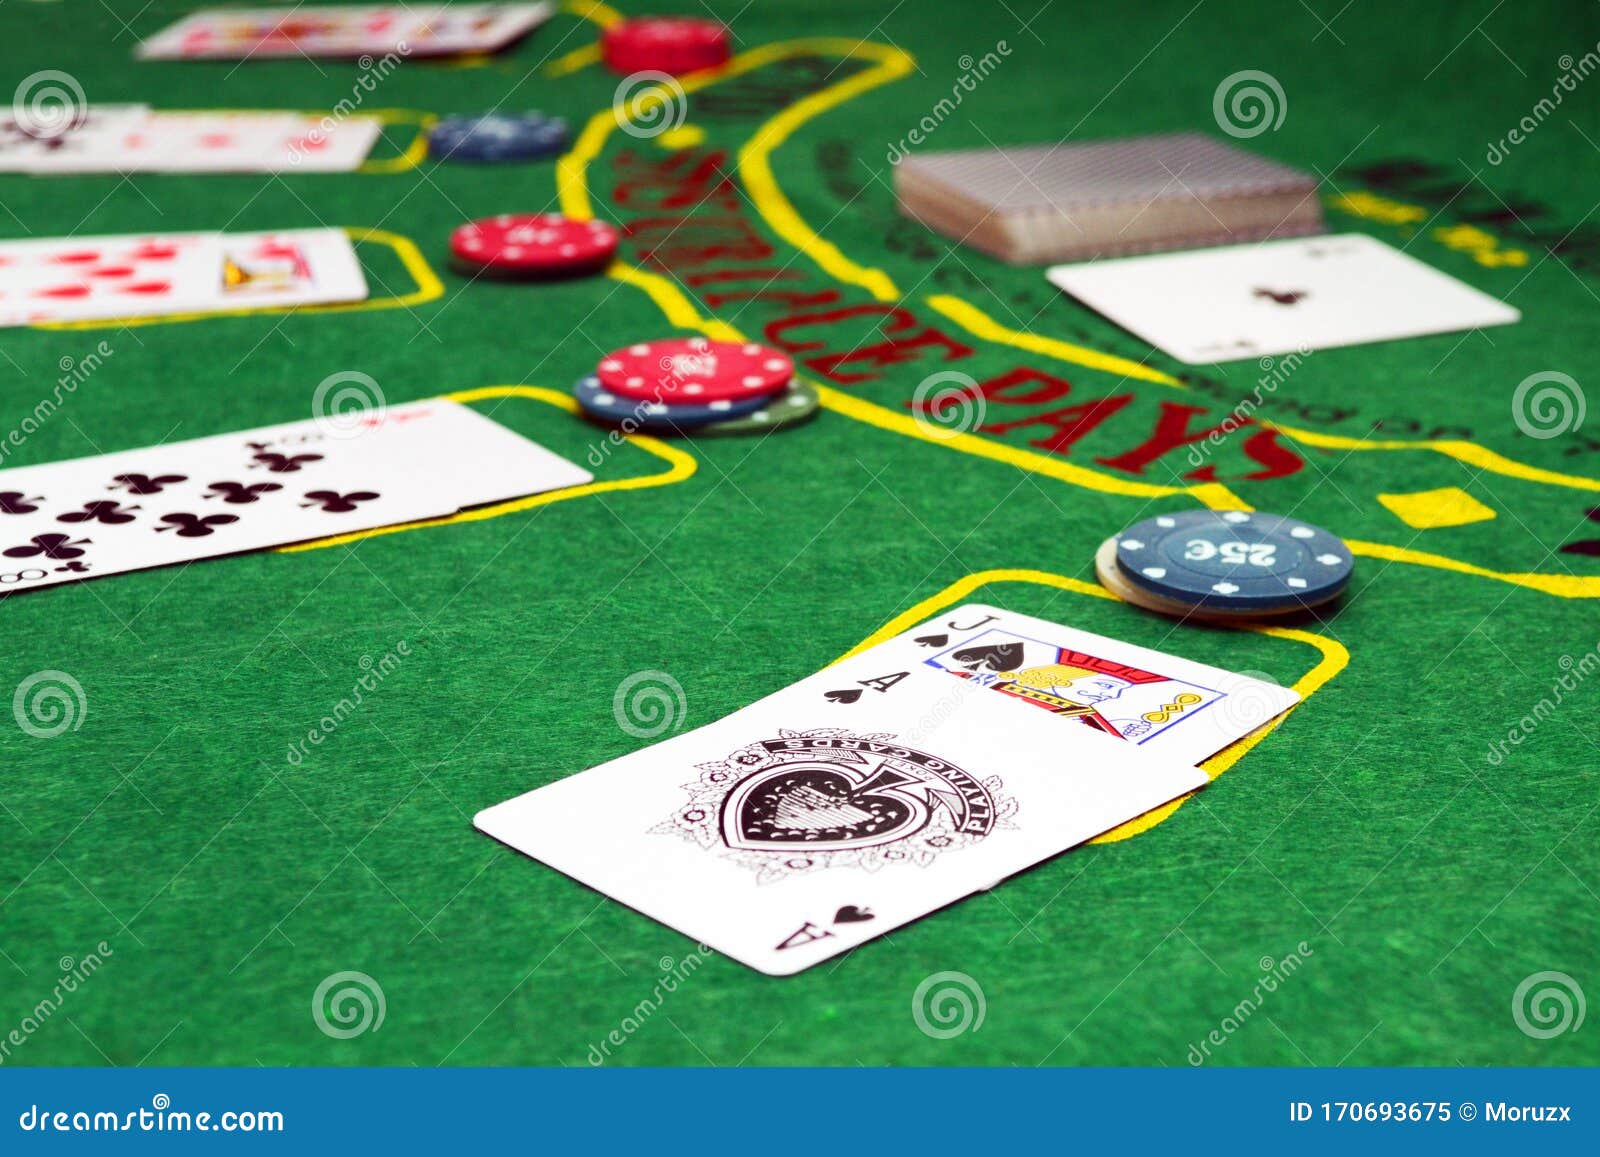 playing the game of blackjack